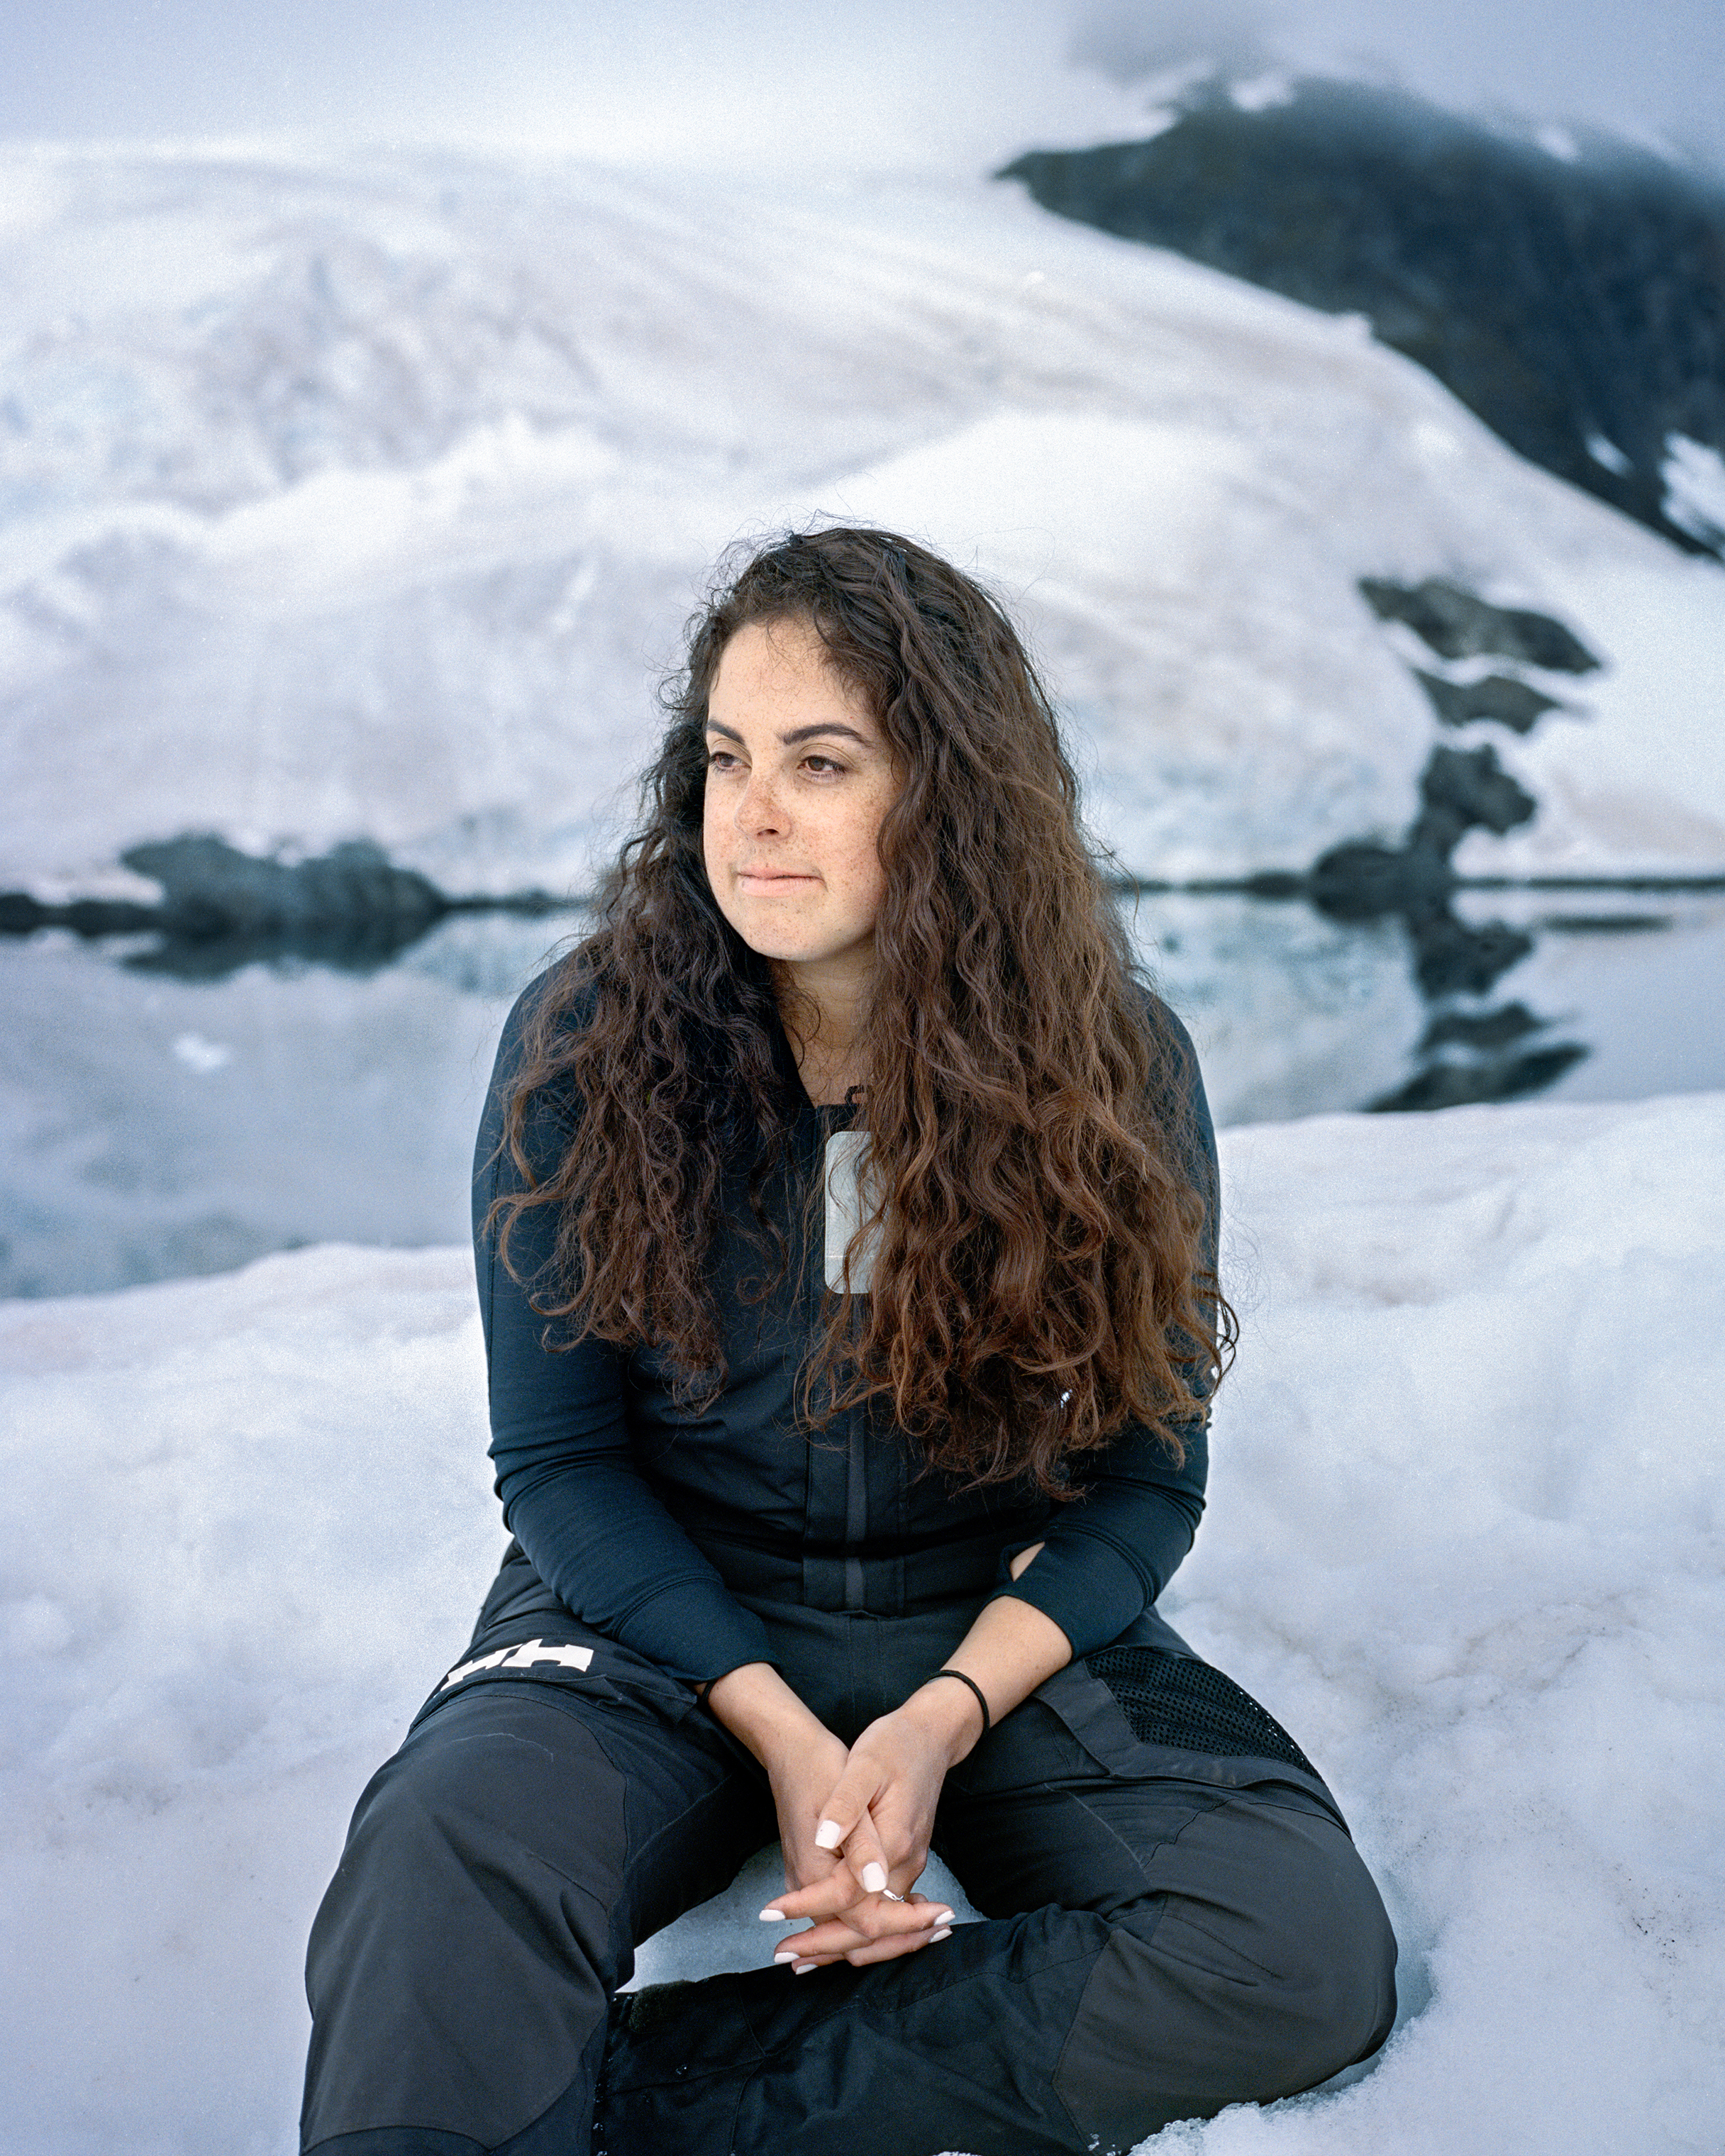 American Aven King is proud to work amongst such a strong community of women, but is concerned that she has never worked with another person of color in Antarctica. “I don’t think I’ve worked with a single other black person in the expedition world. At all.”